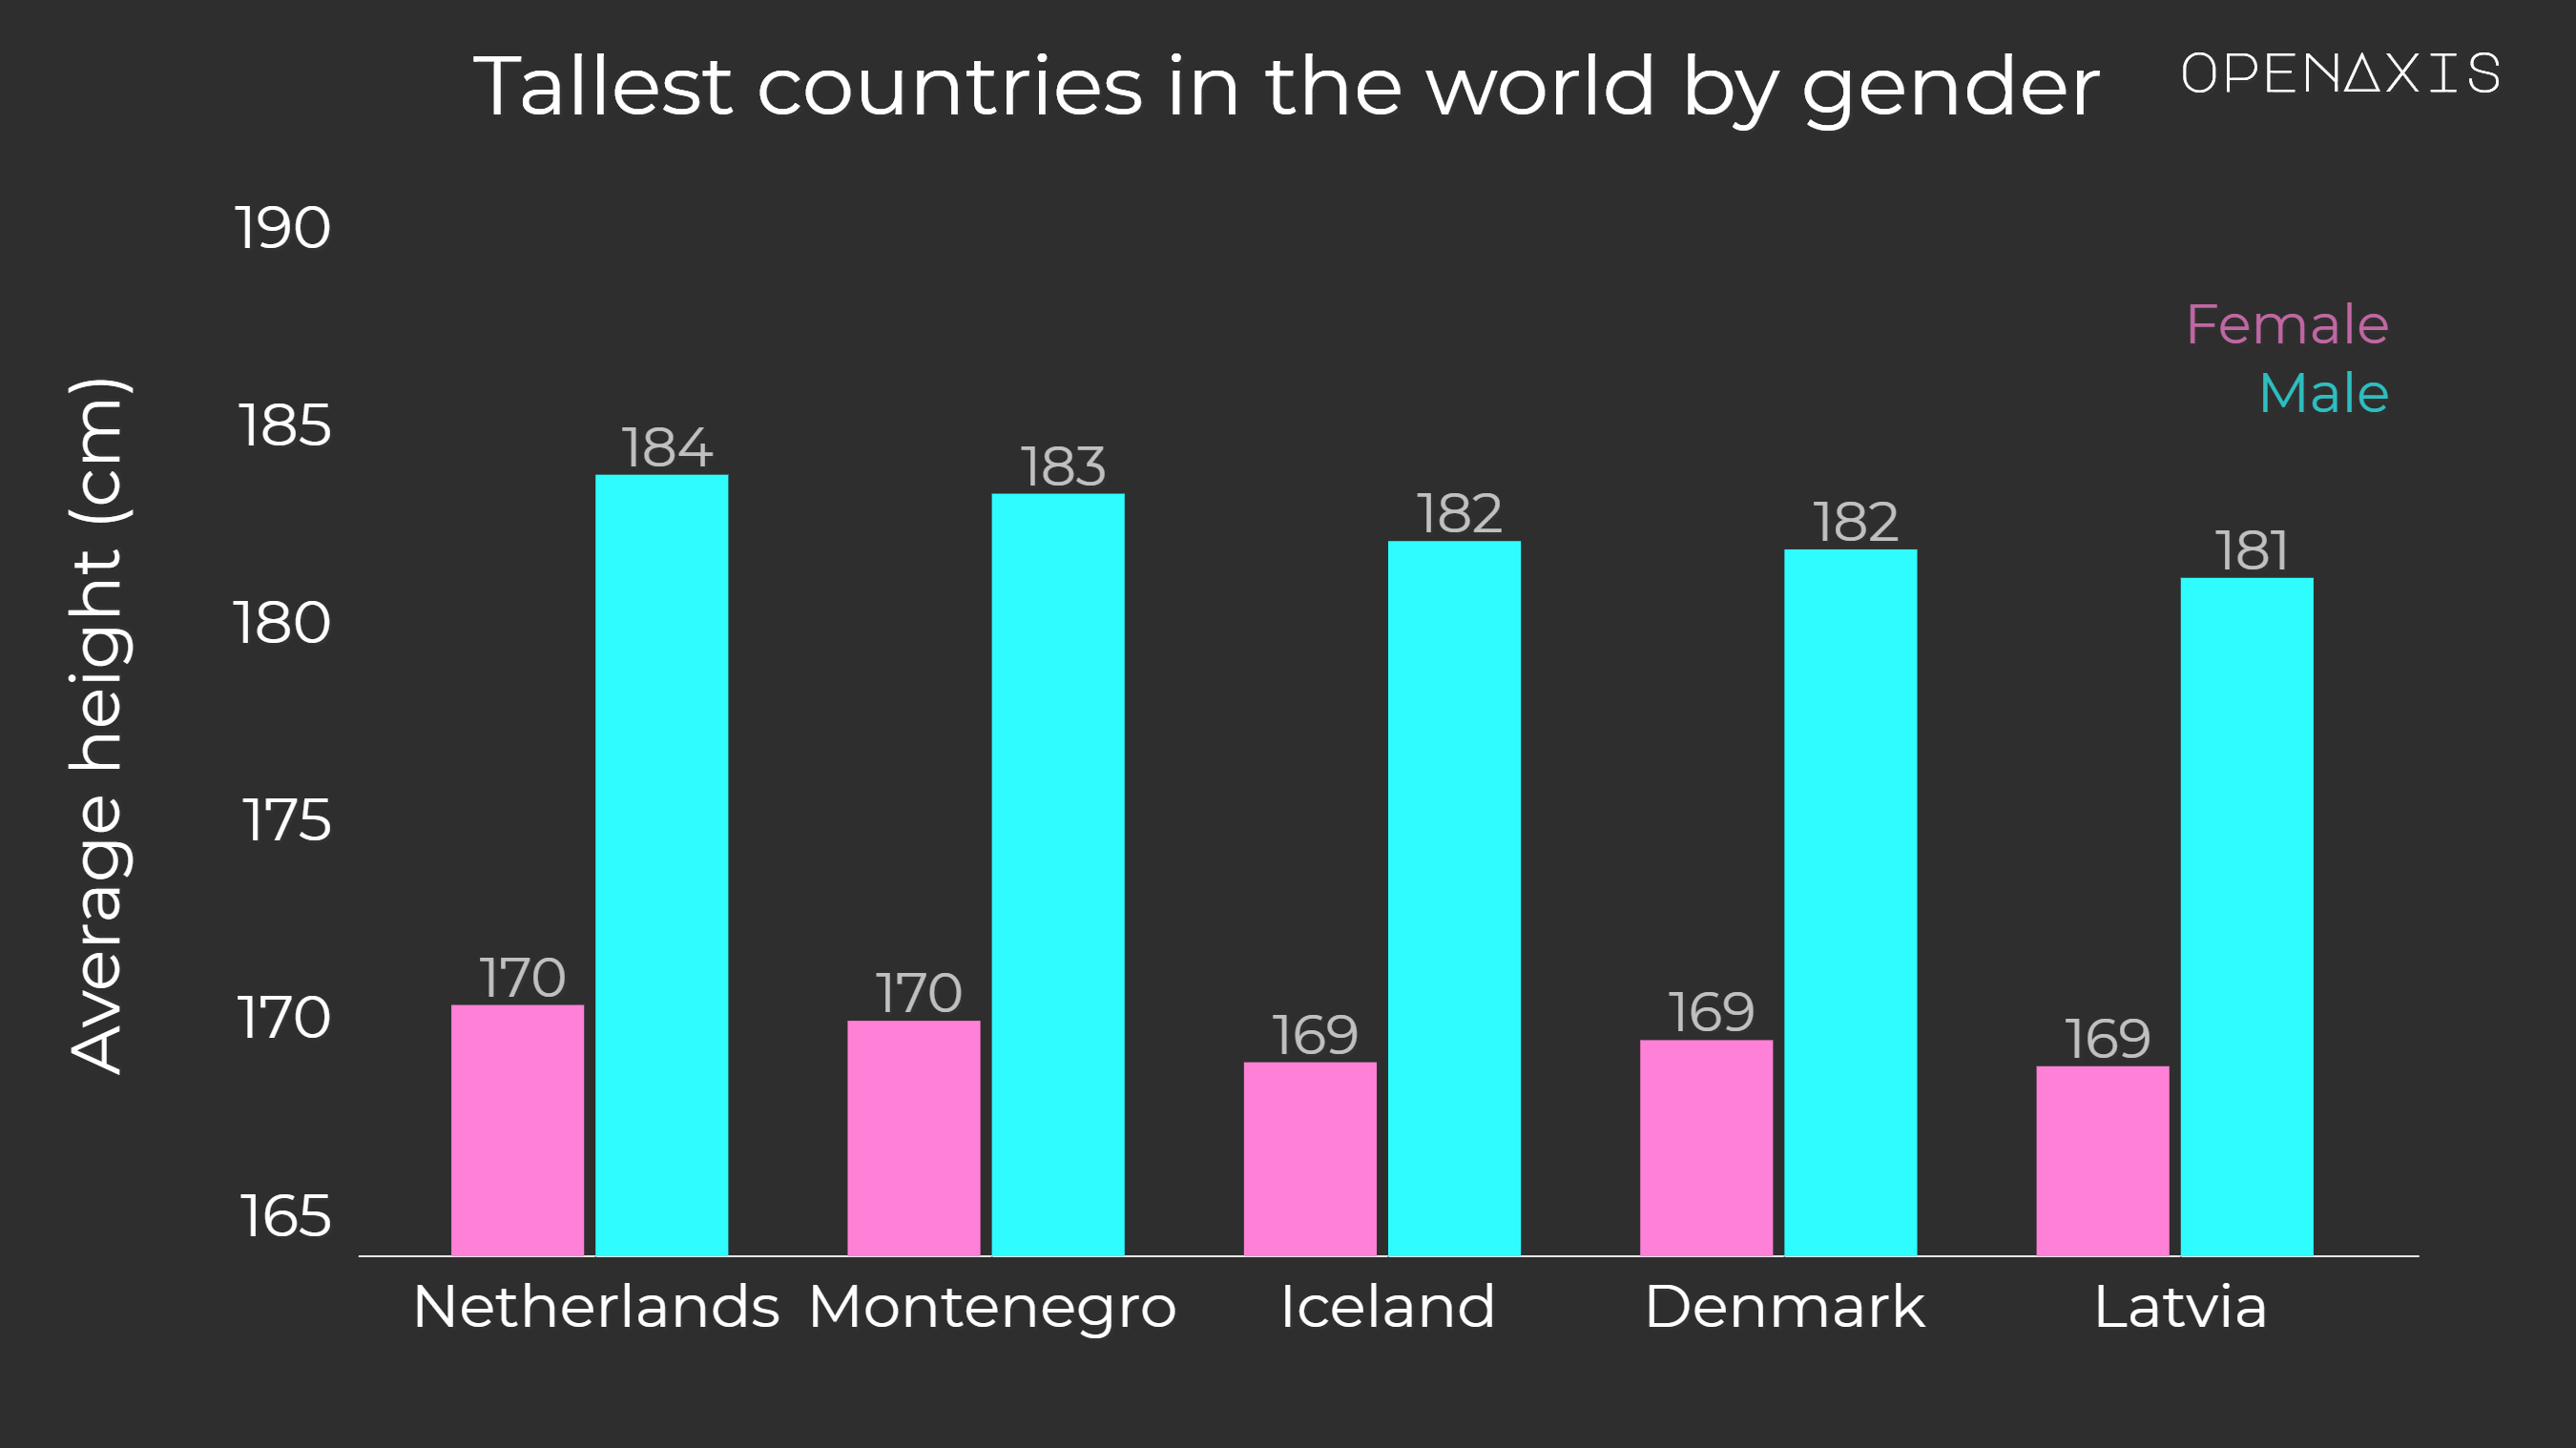 "Tallest countries in the world by gender"